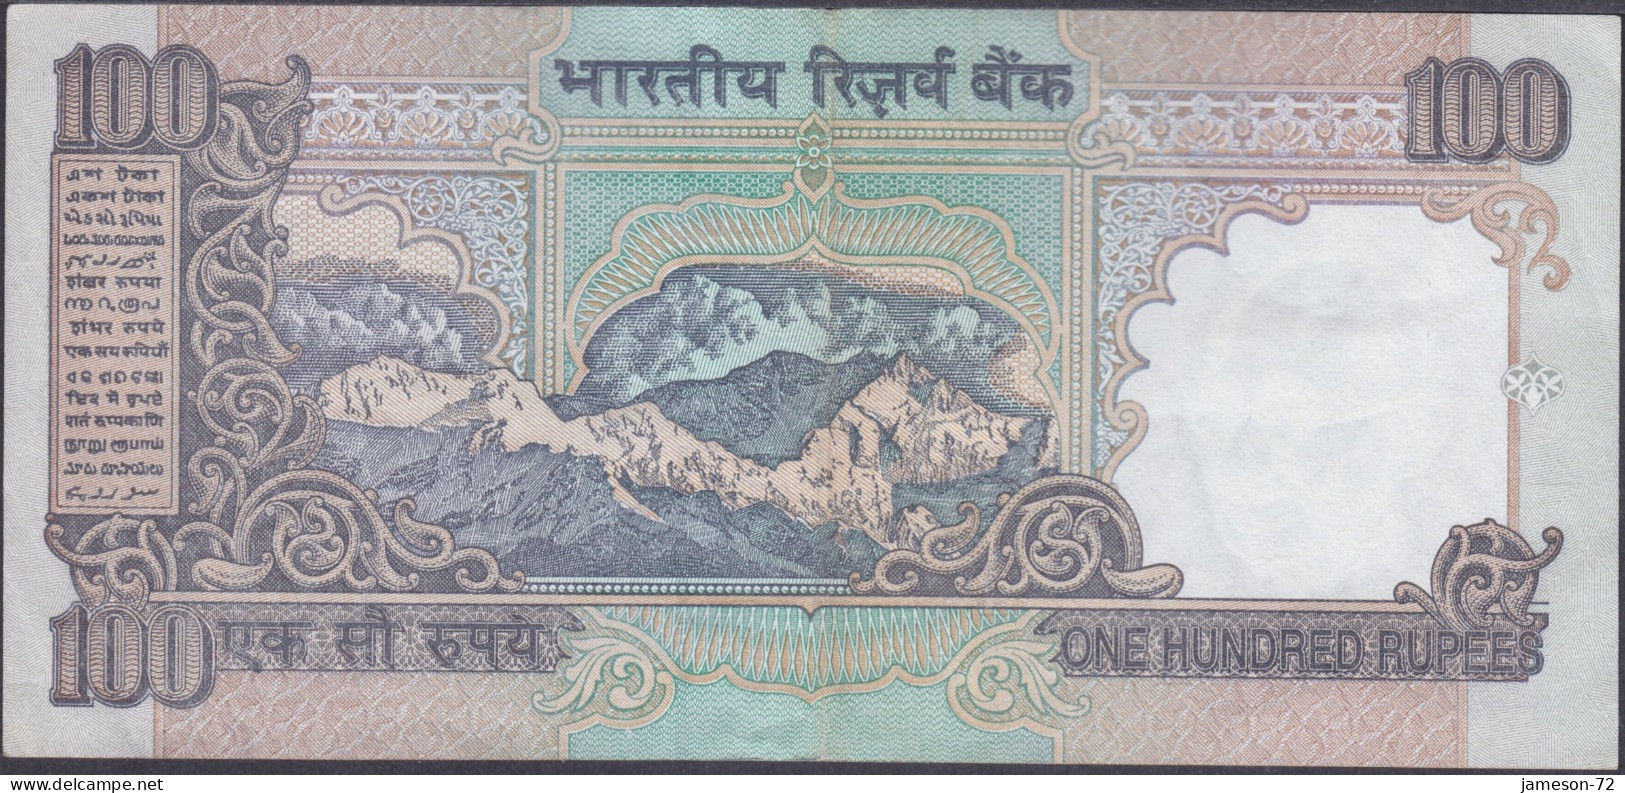 INDIA - 100 Rupees ND (1996) P# 91 Asia Banknote - Edelweiss Coins - Indien